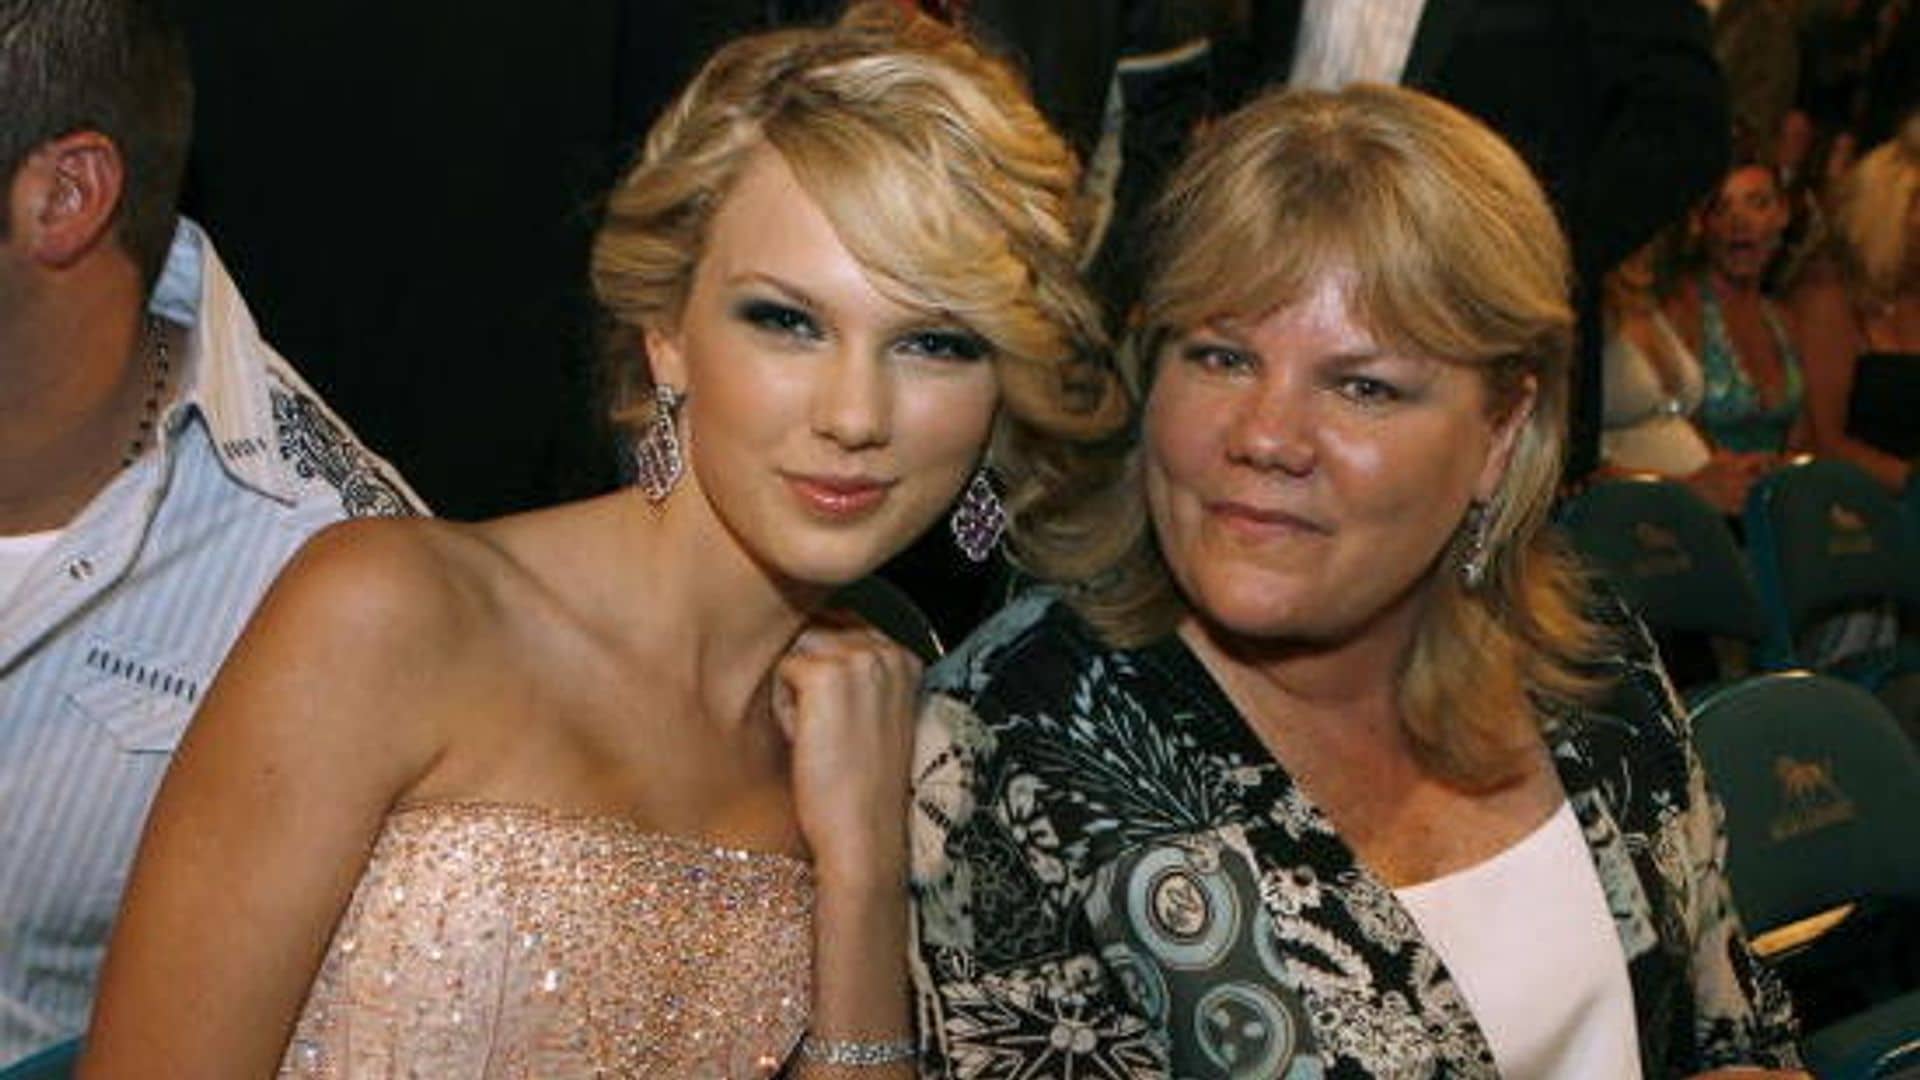 Taylor Swift reveals her mom has been diagnosed with cancer